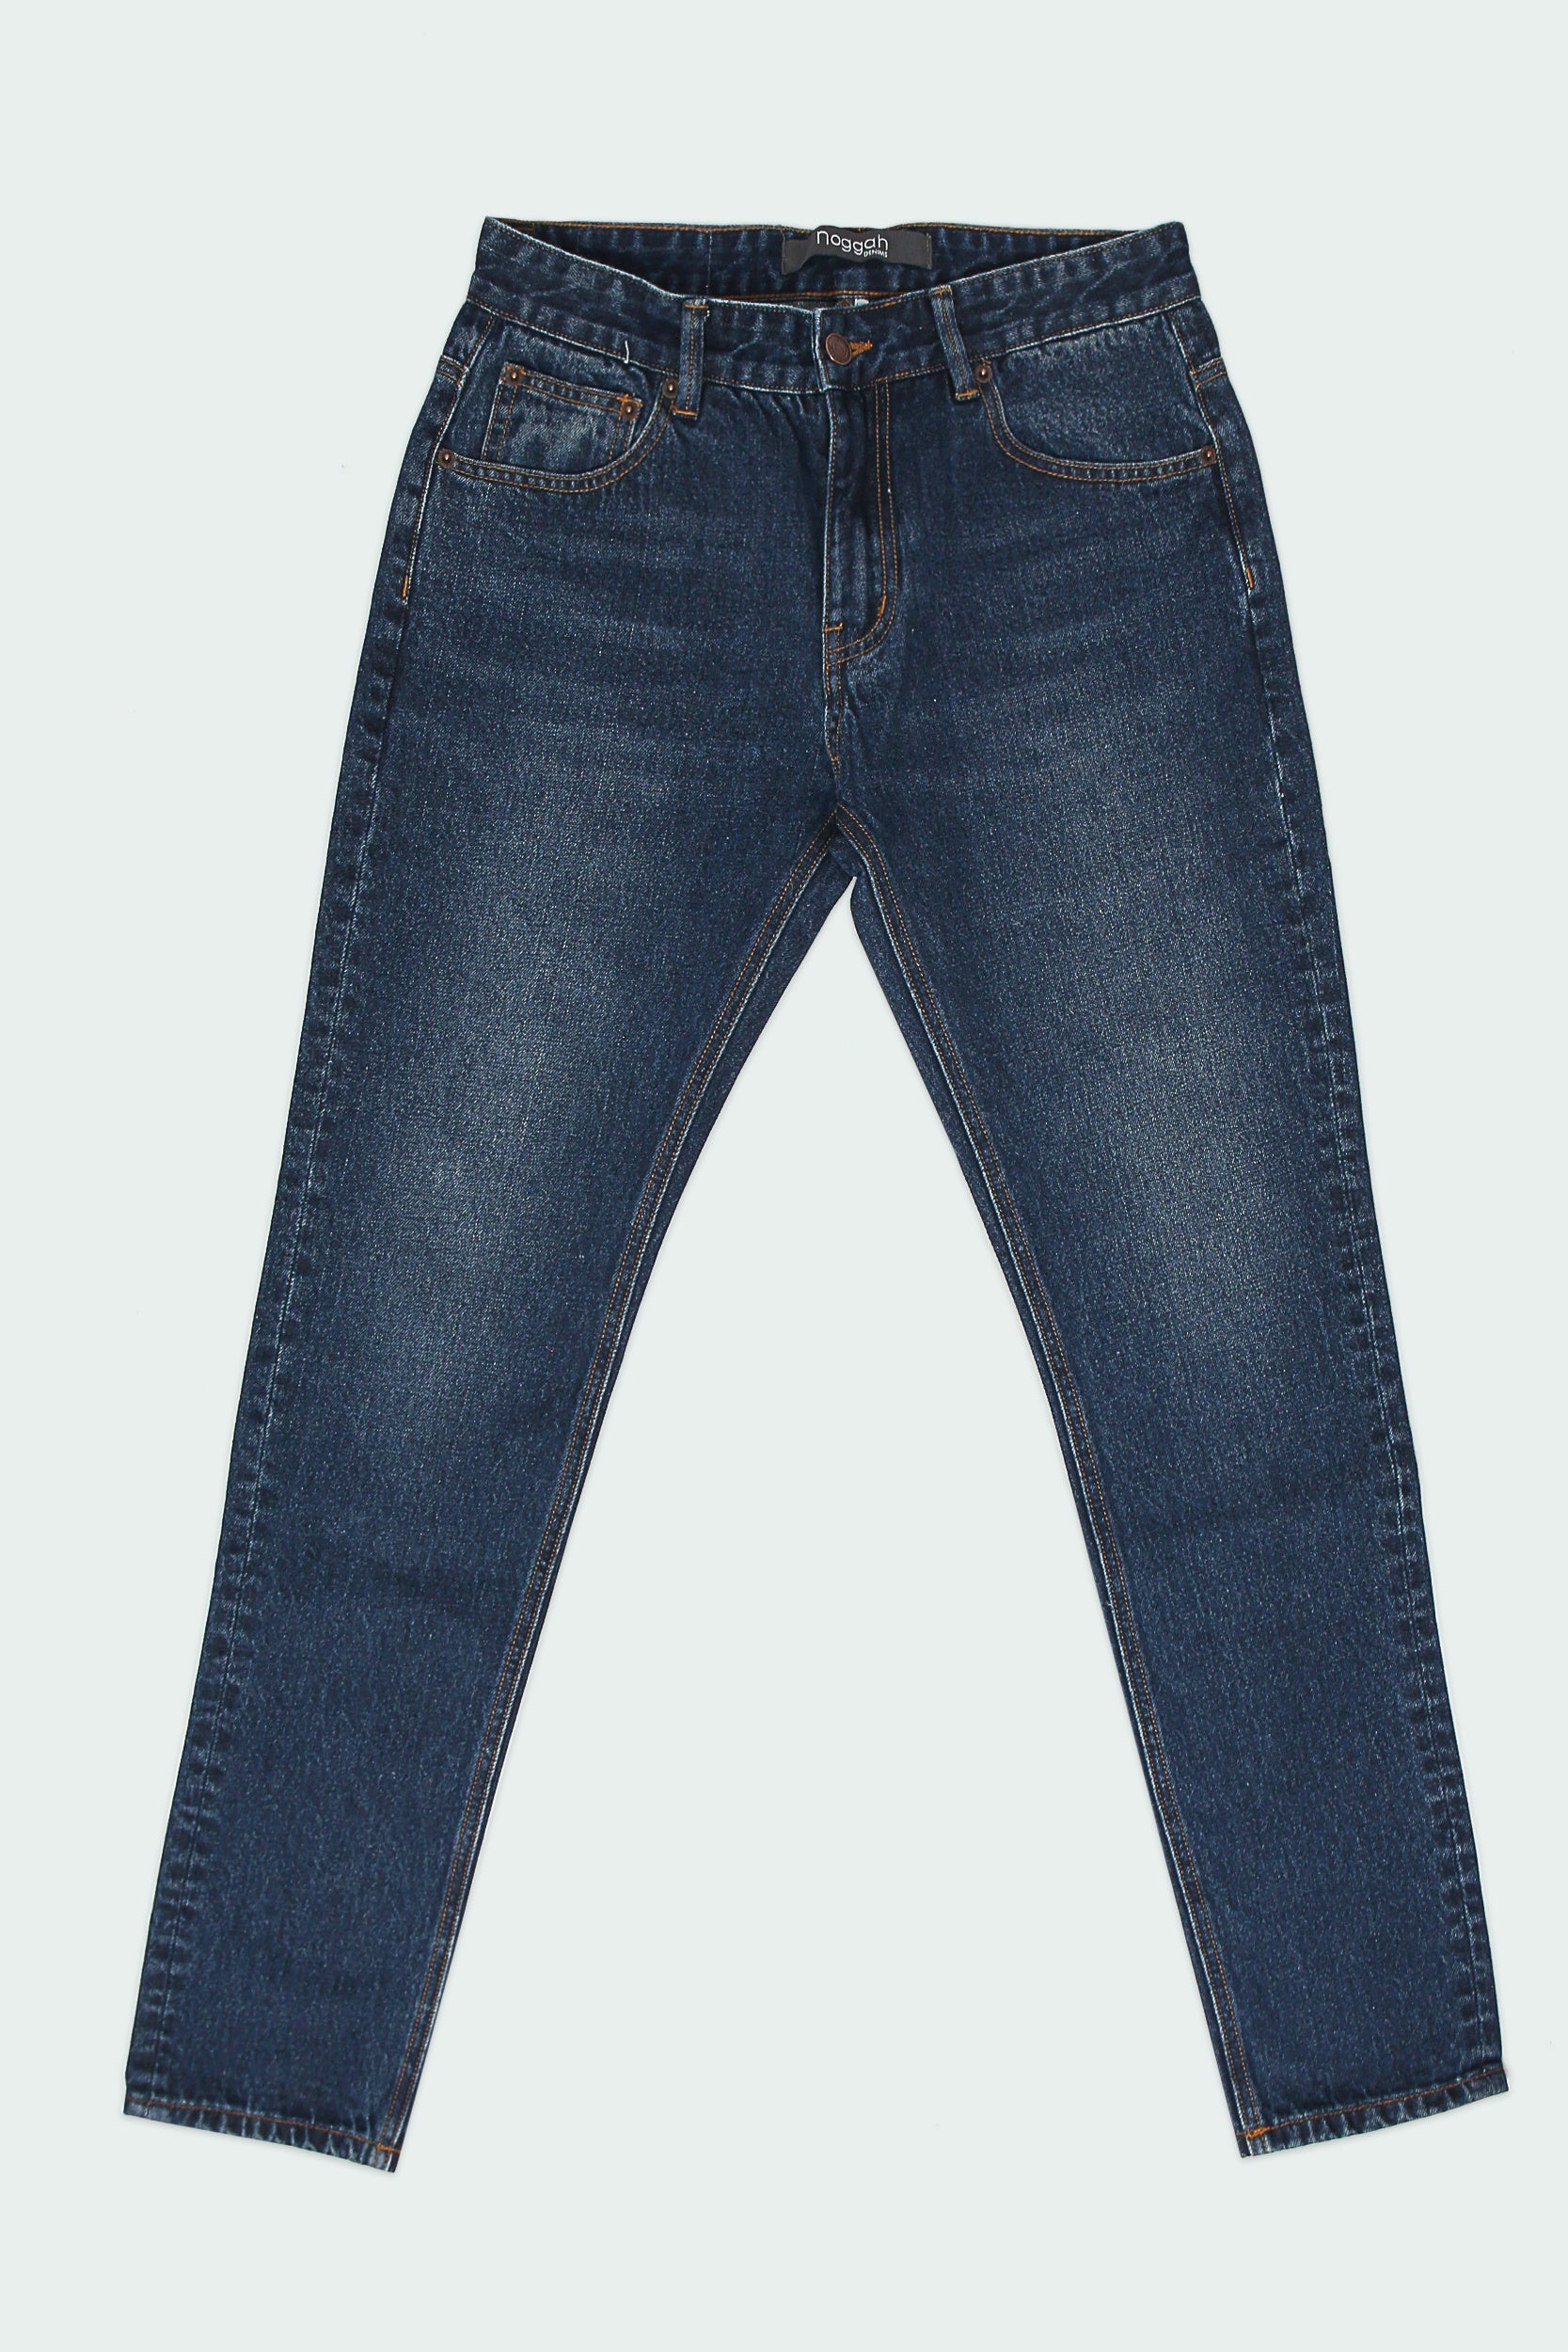 Details more than 144 mens fitted jeans super hot